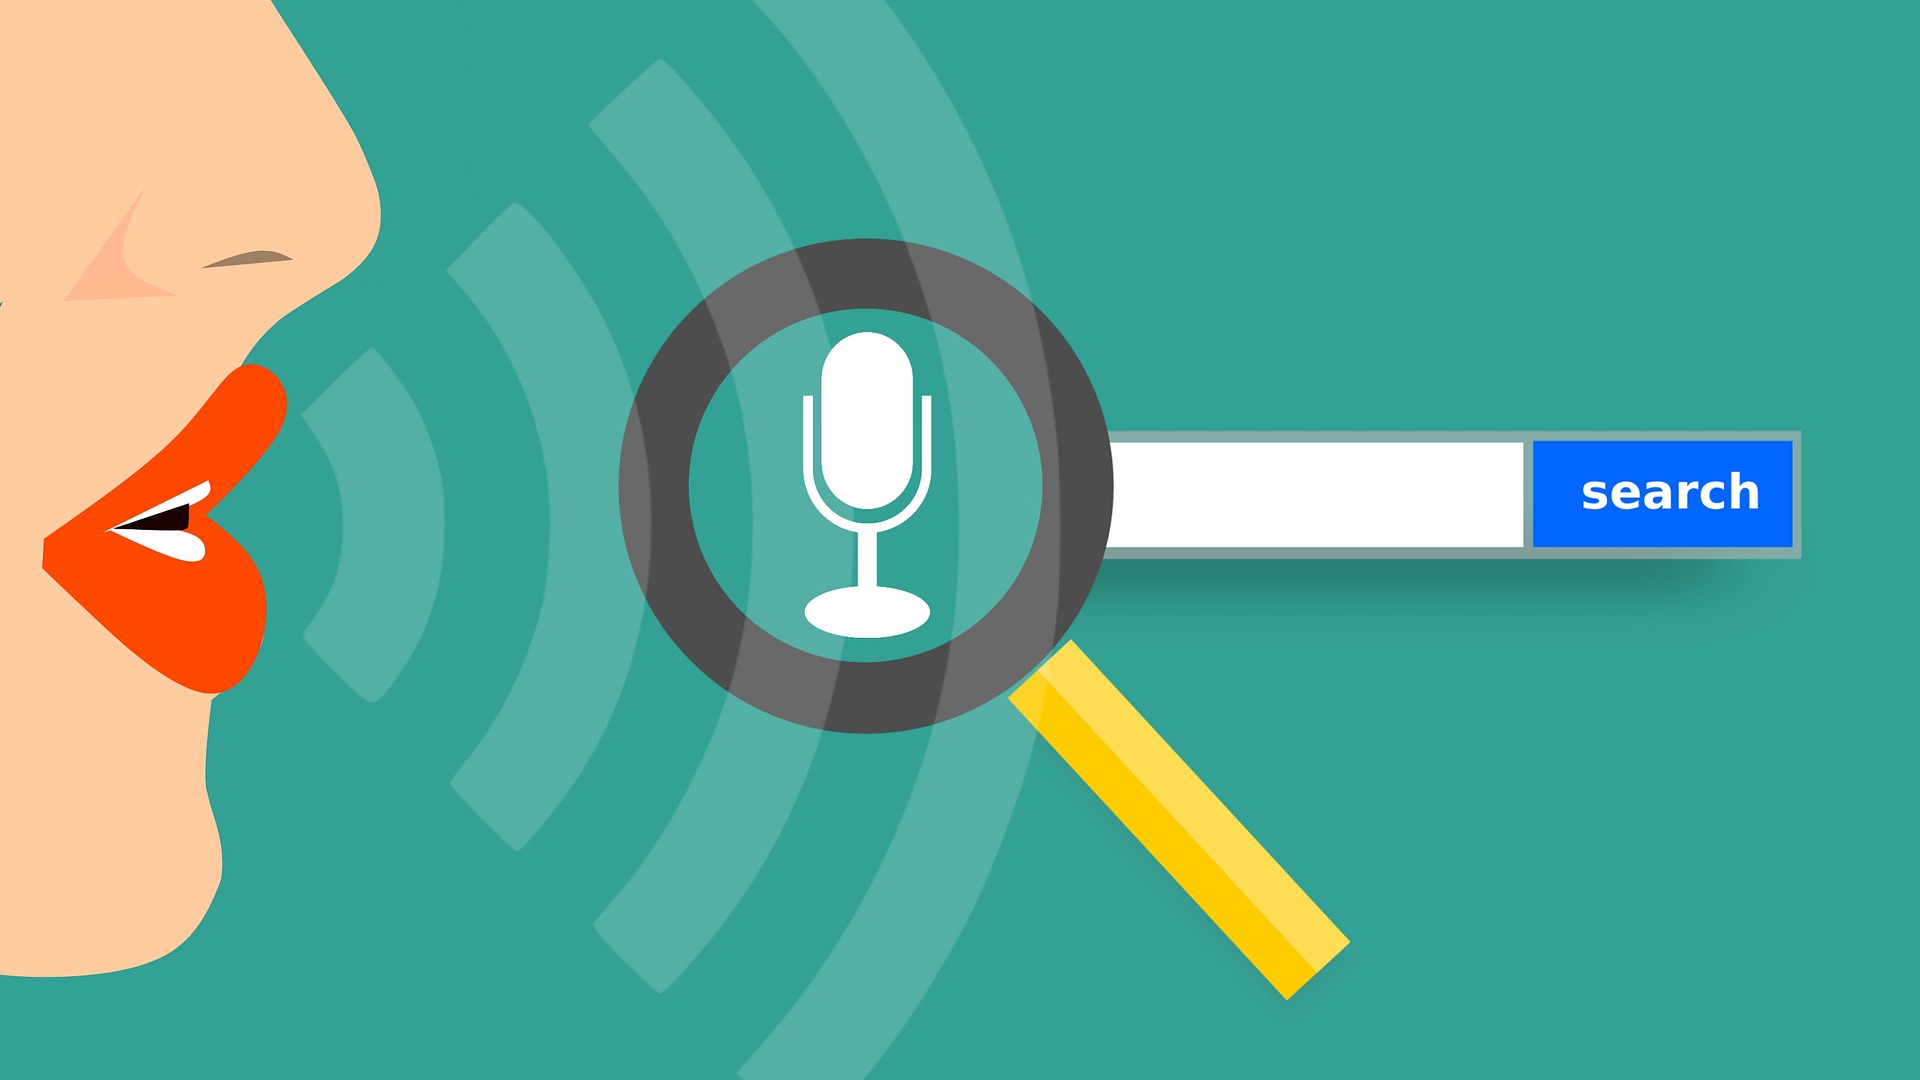 Taking a closer look at how to optimize your website for voice search